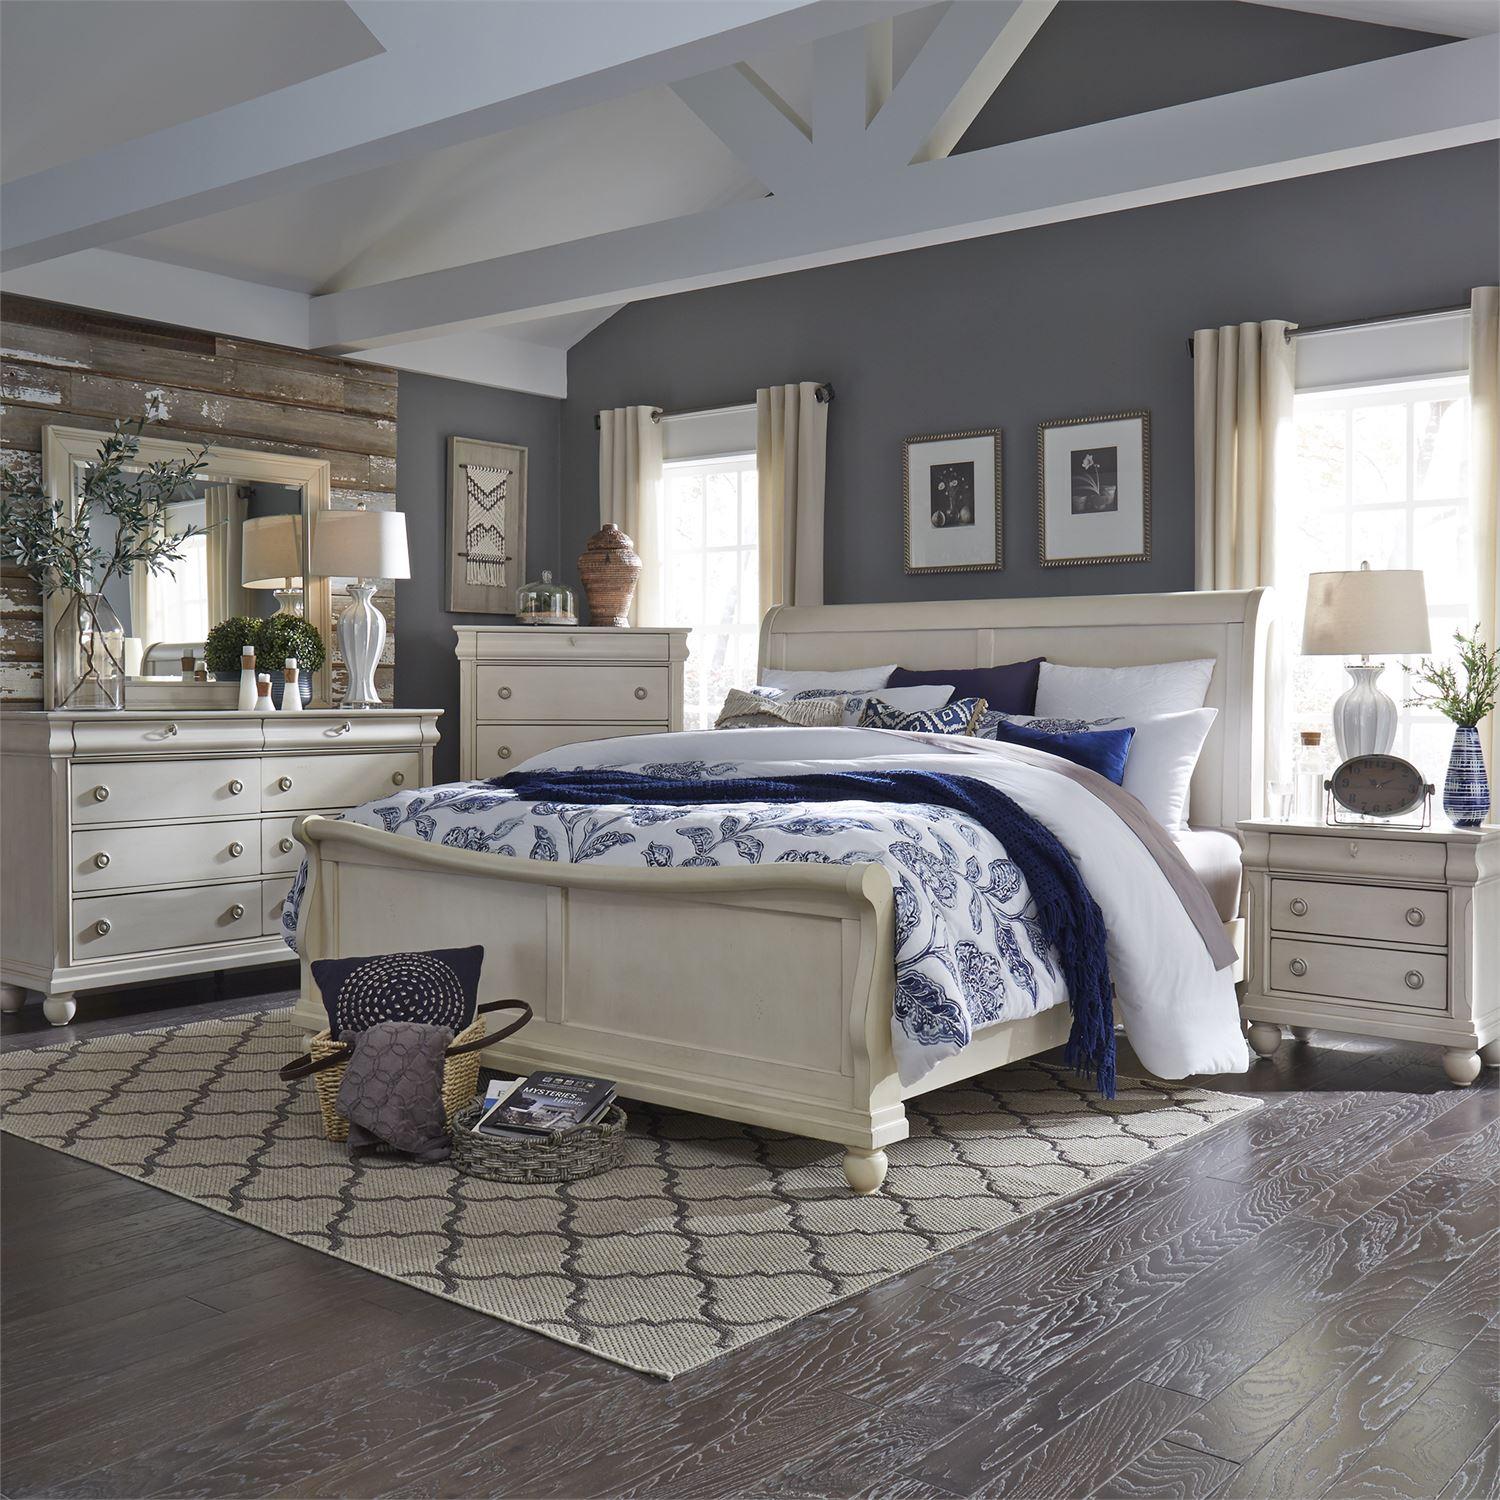 Traditional Sleigh Bedroom Set Rustic Traditions II  (689-BR) Sleigh Bedroom Set 689-BR-QSLDMCN in White 